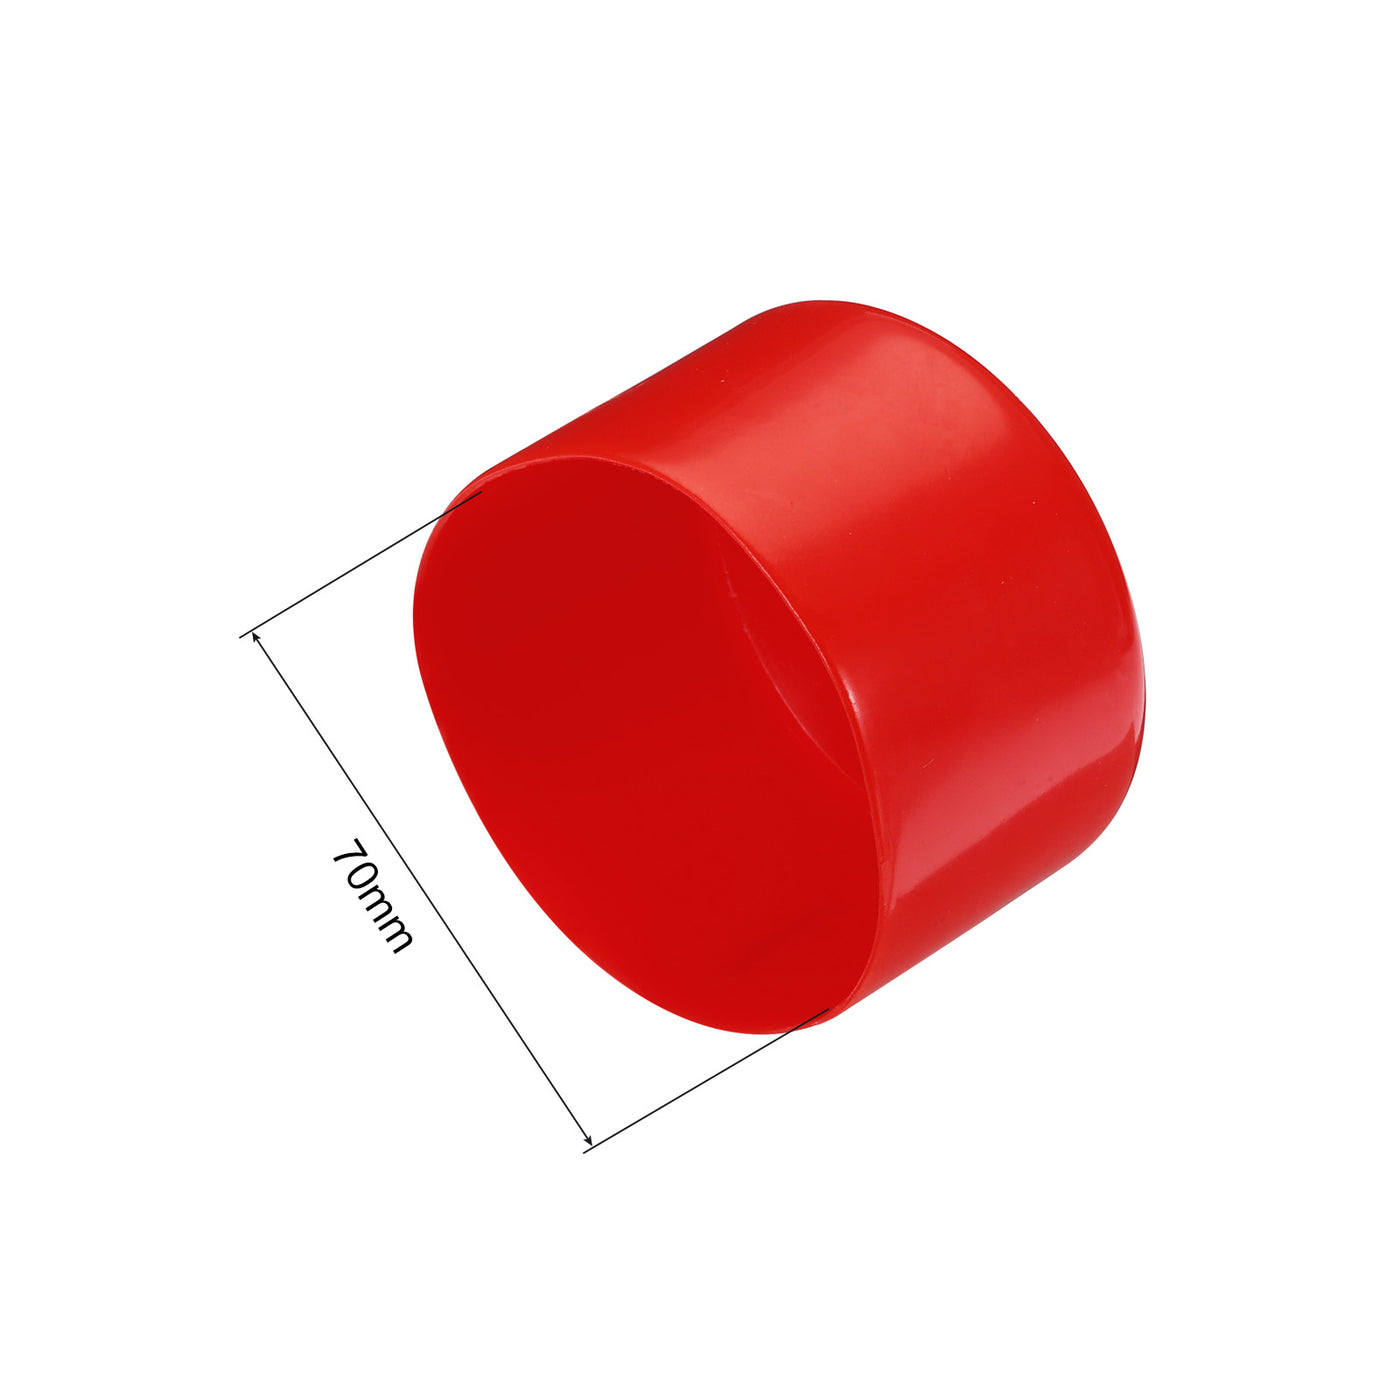 uxcell Uxcell 4pcs Rubber End Caps 70mm ID Vinyl Round Tube Bolt Cap Cover Screw Thread Protectors Red